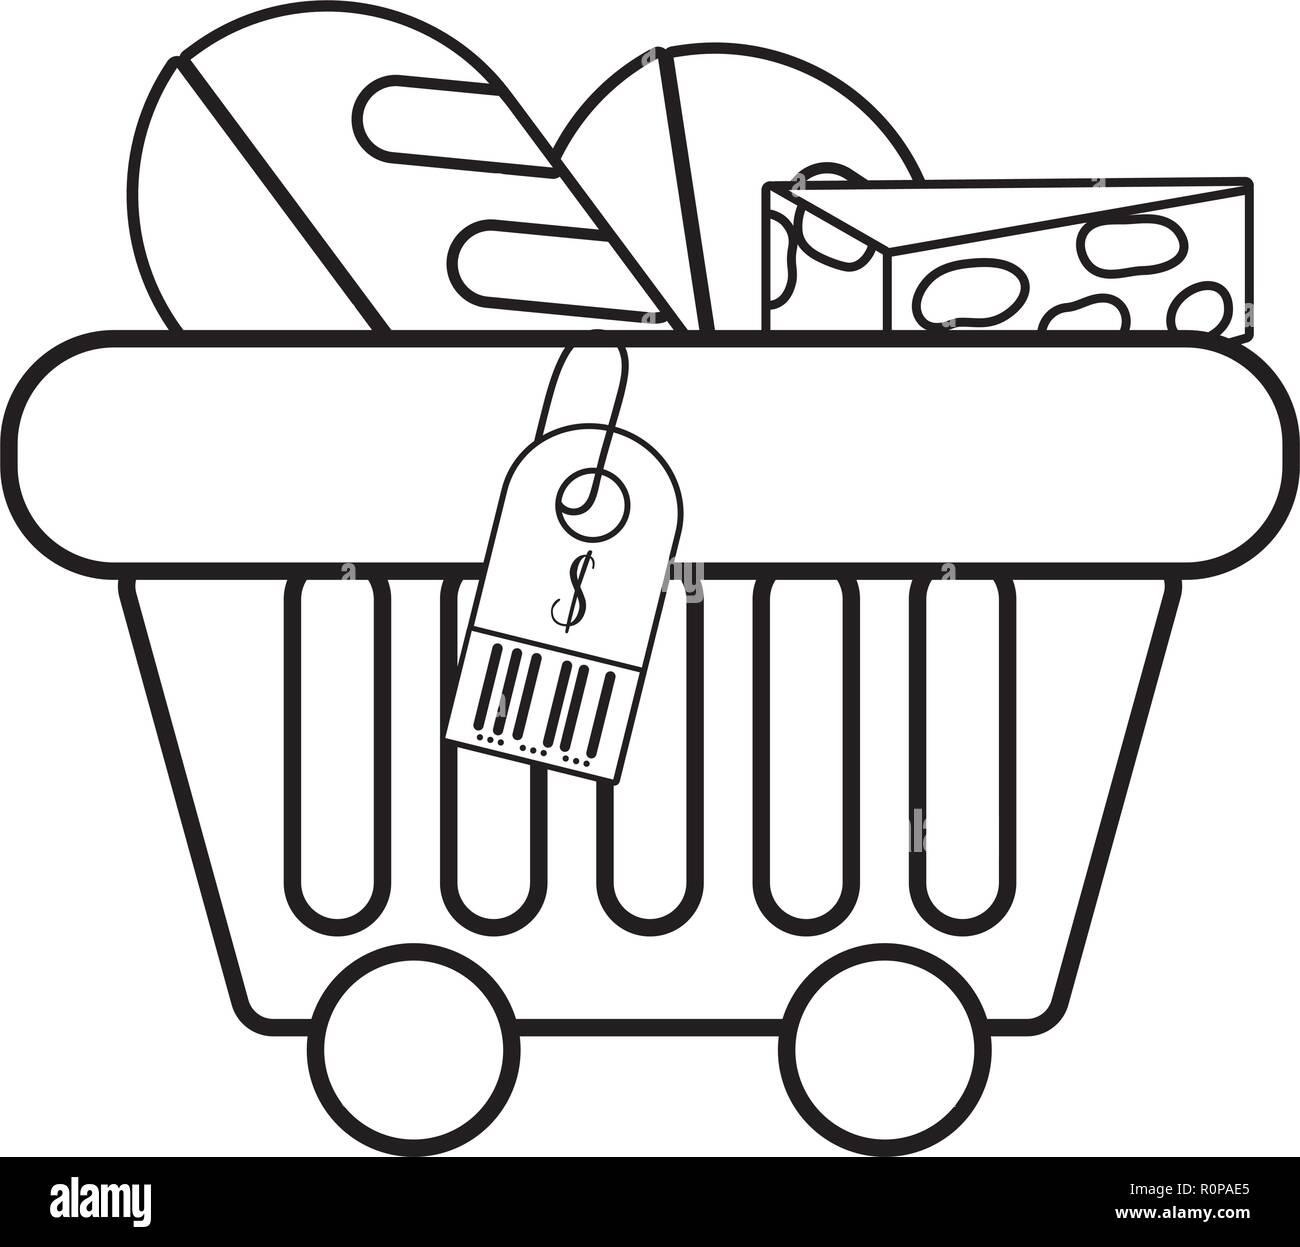 supermarket grocery products cartoon Stock Vector